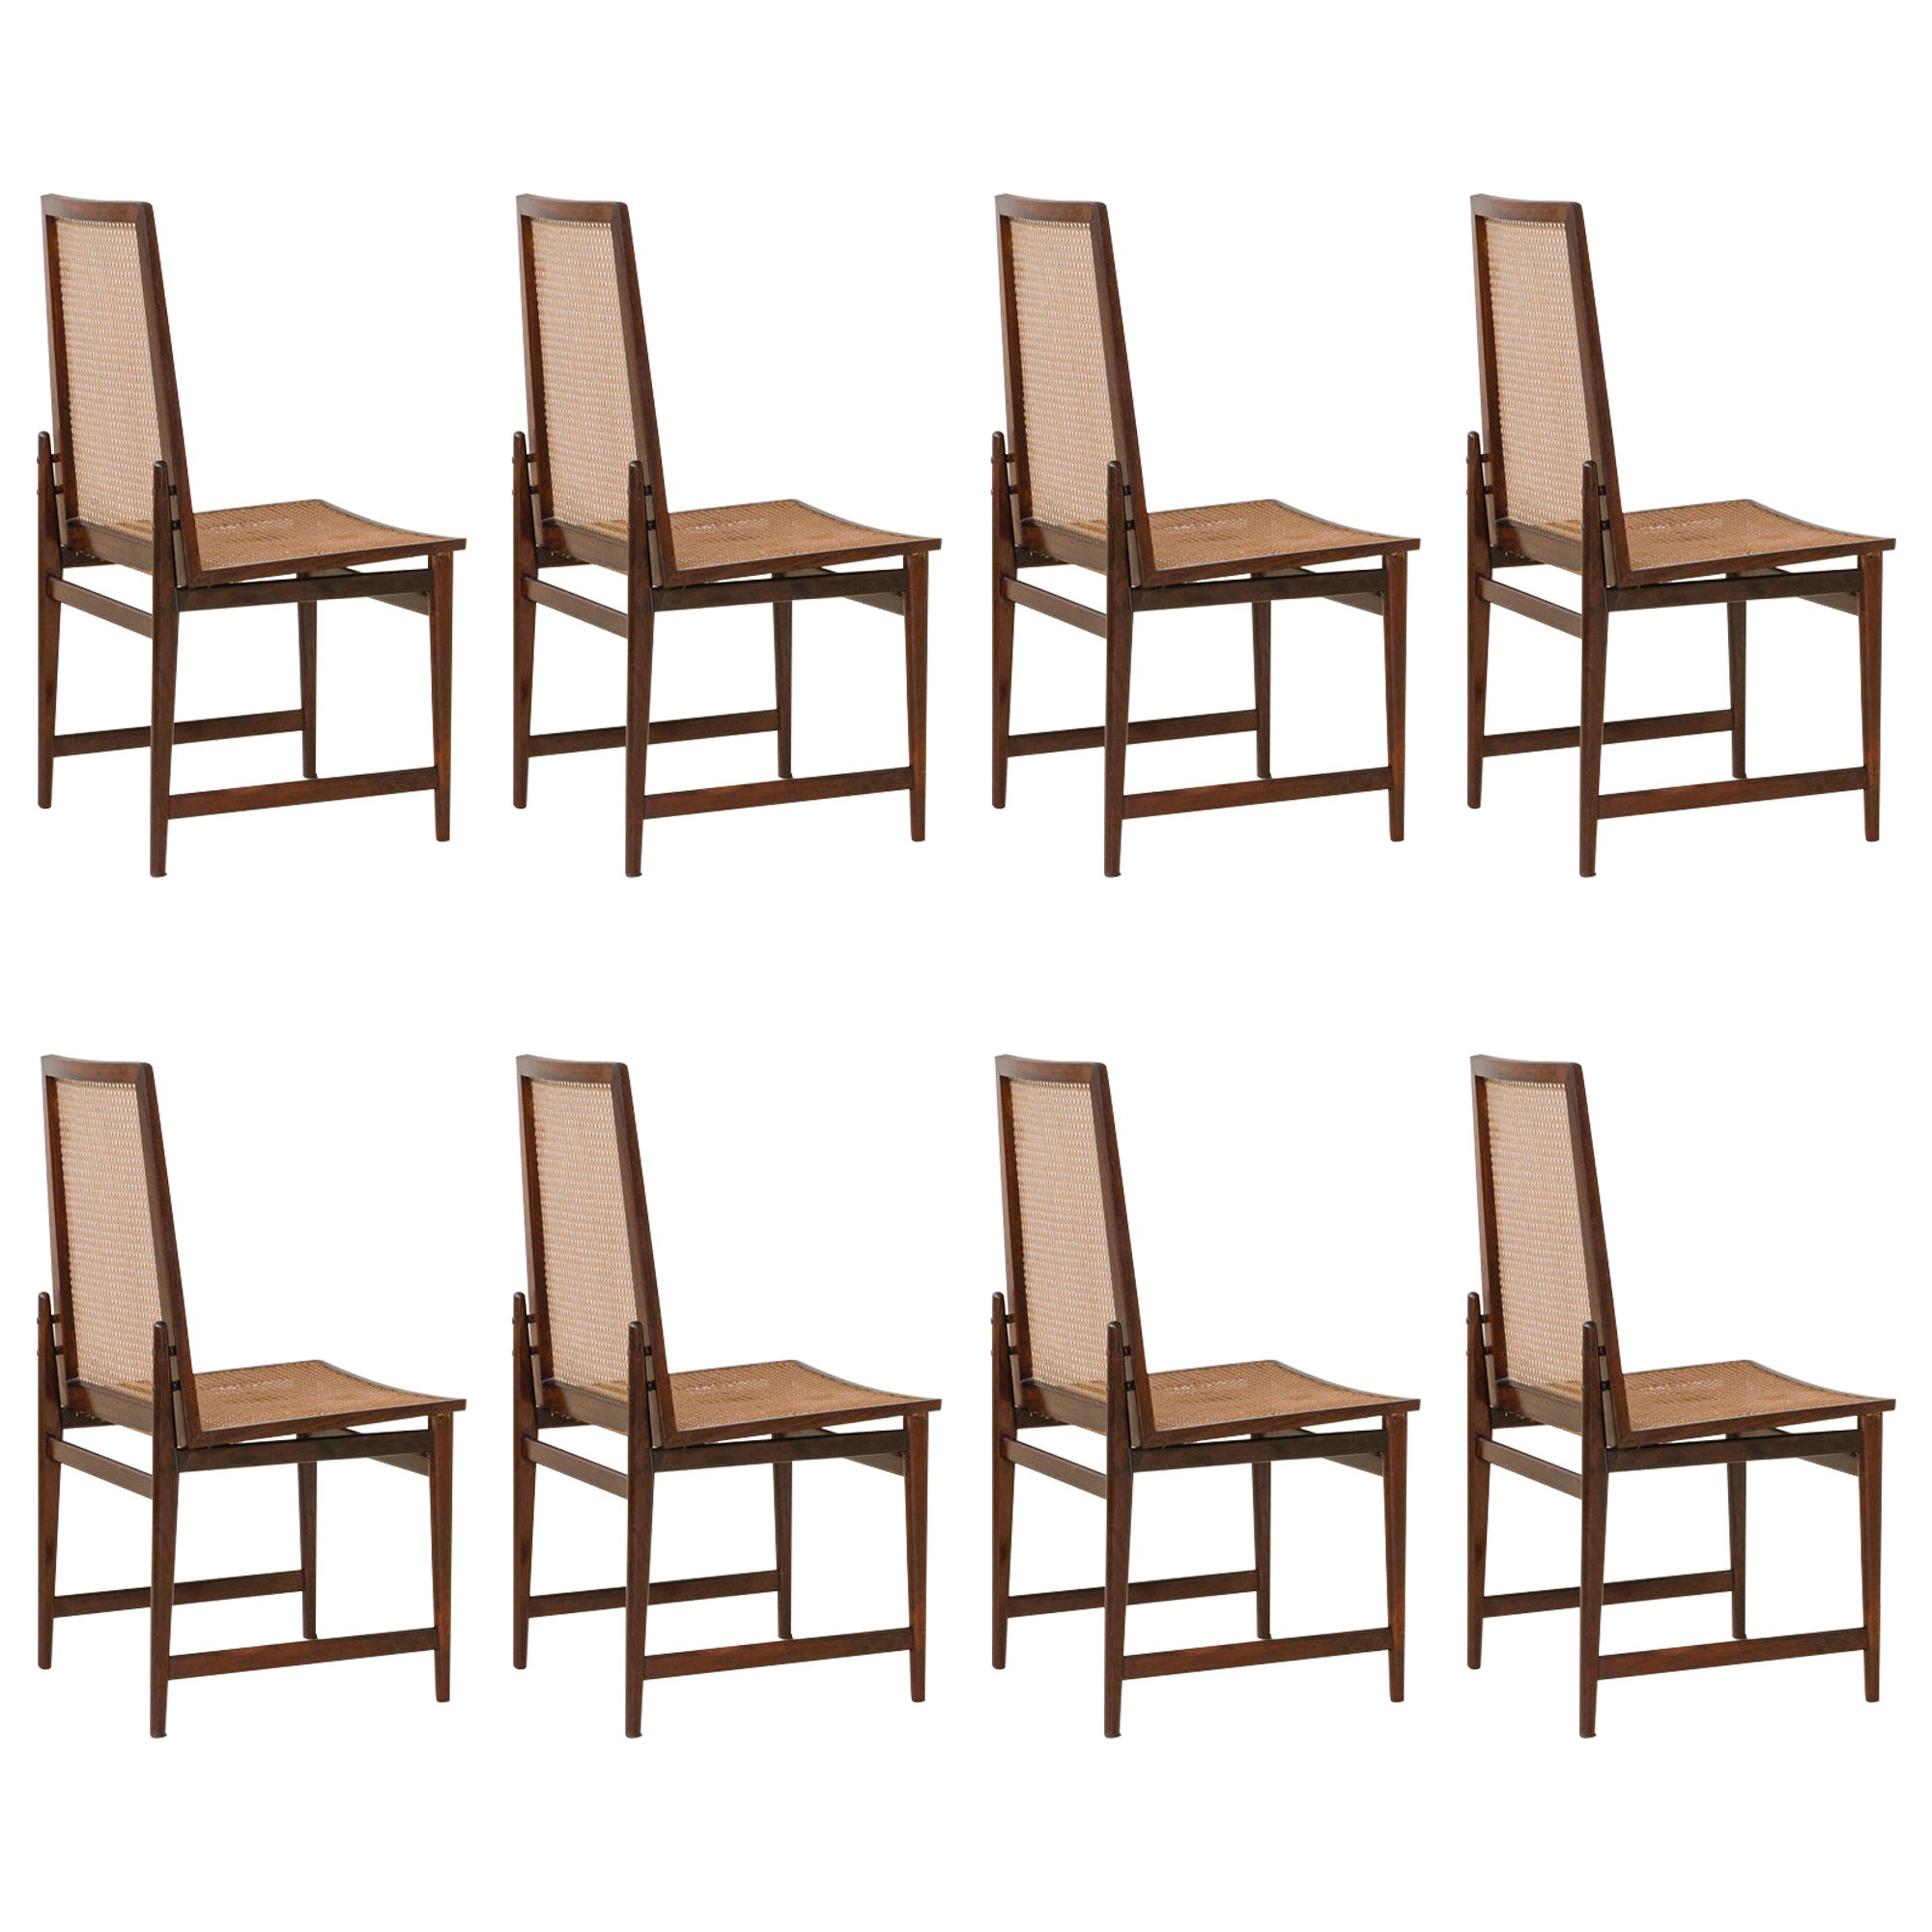 Set of 8 Rosewood and Cane Chairs by Móveis Cantù, 1960s, Brazilian Midcentury For Sale